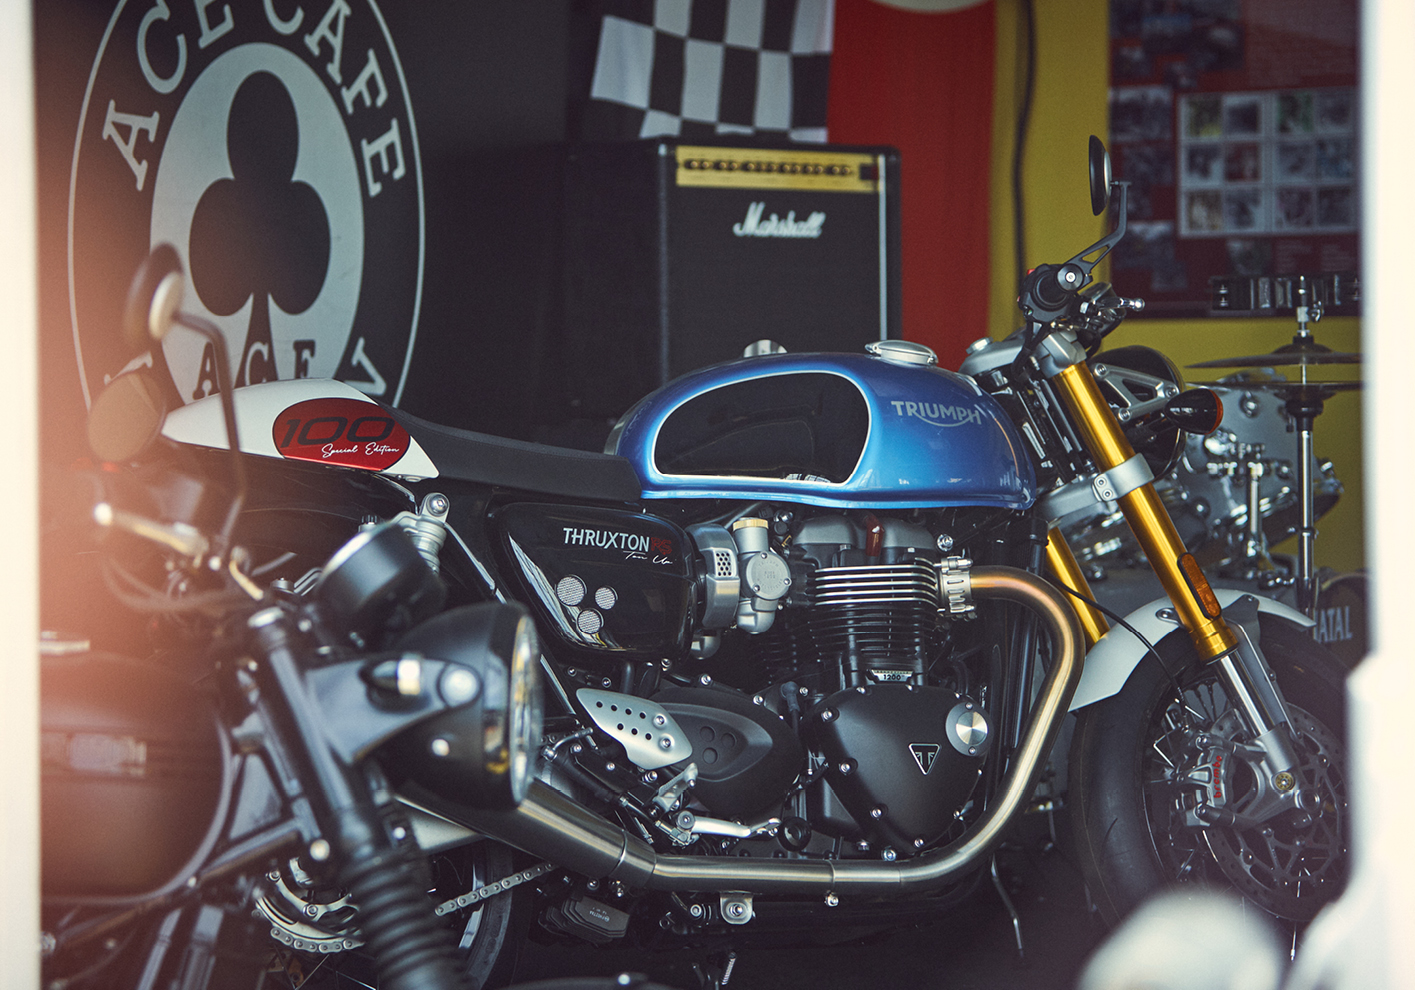 Triumph Thruxton RS Ton Up motorcycle at the Ace Cafe